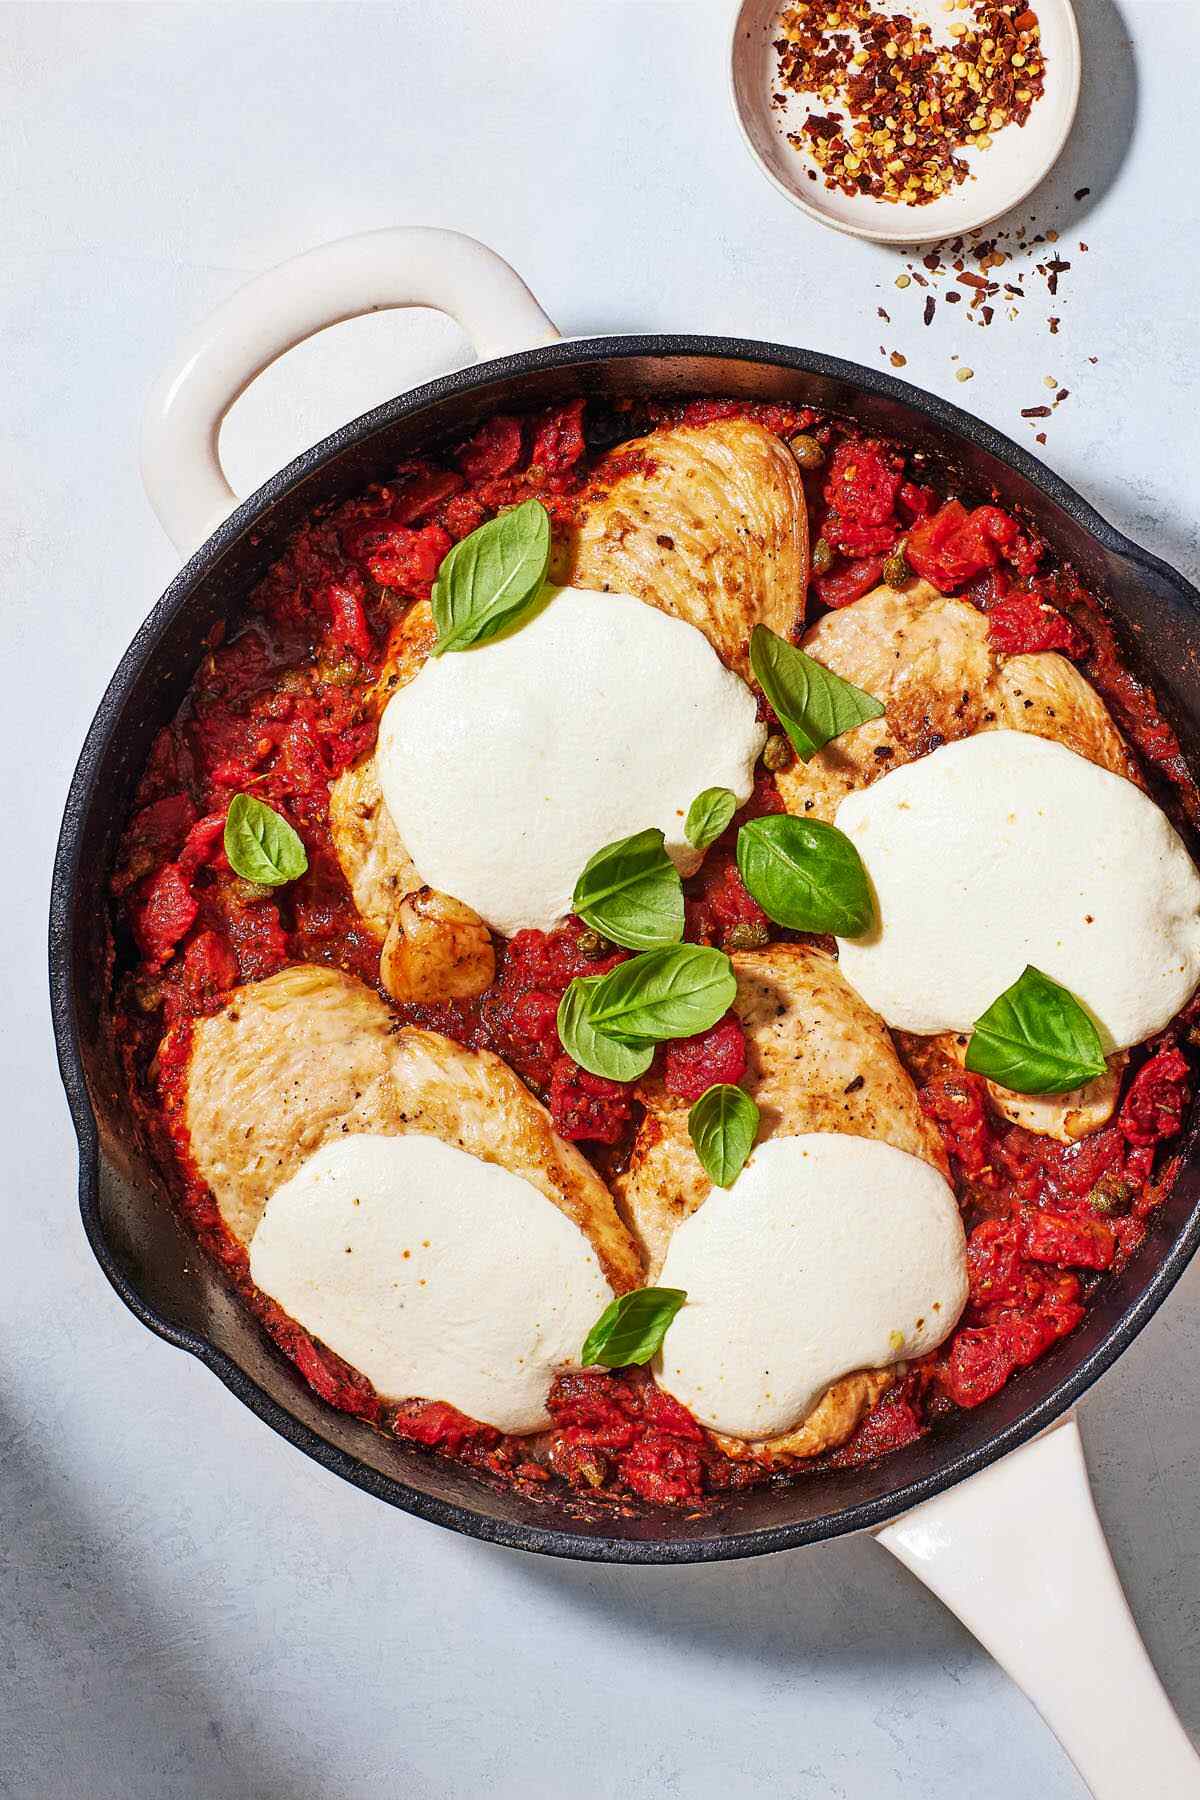 pollo alla pizzaiola chicken in tomato sauce in a skillet next to a small bowl of red pepper flakes.